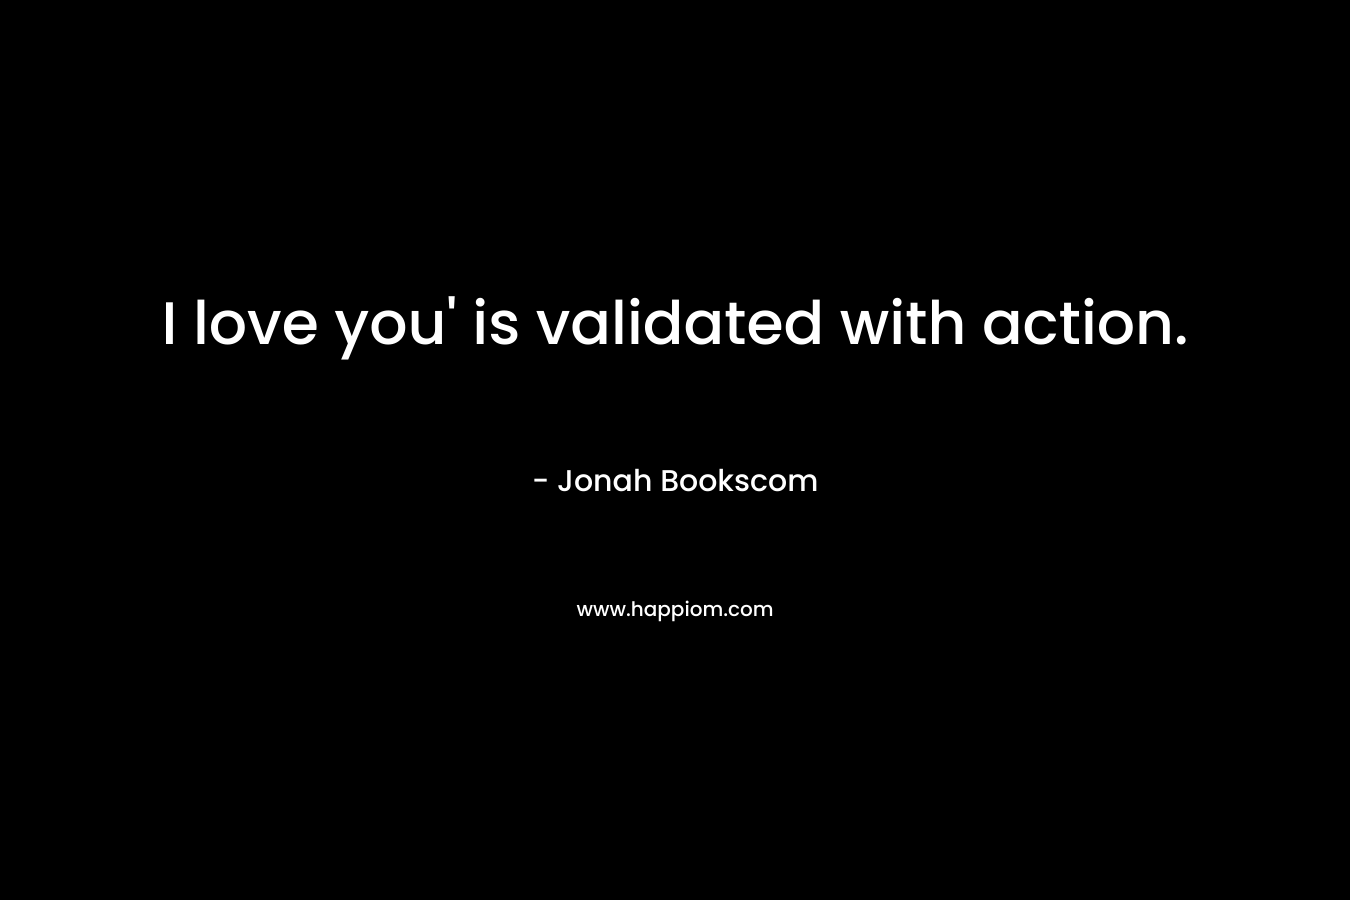 I love you' is validated with action.